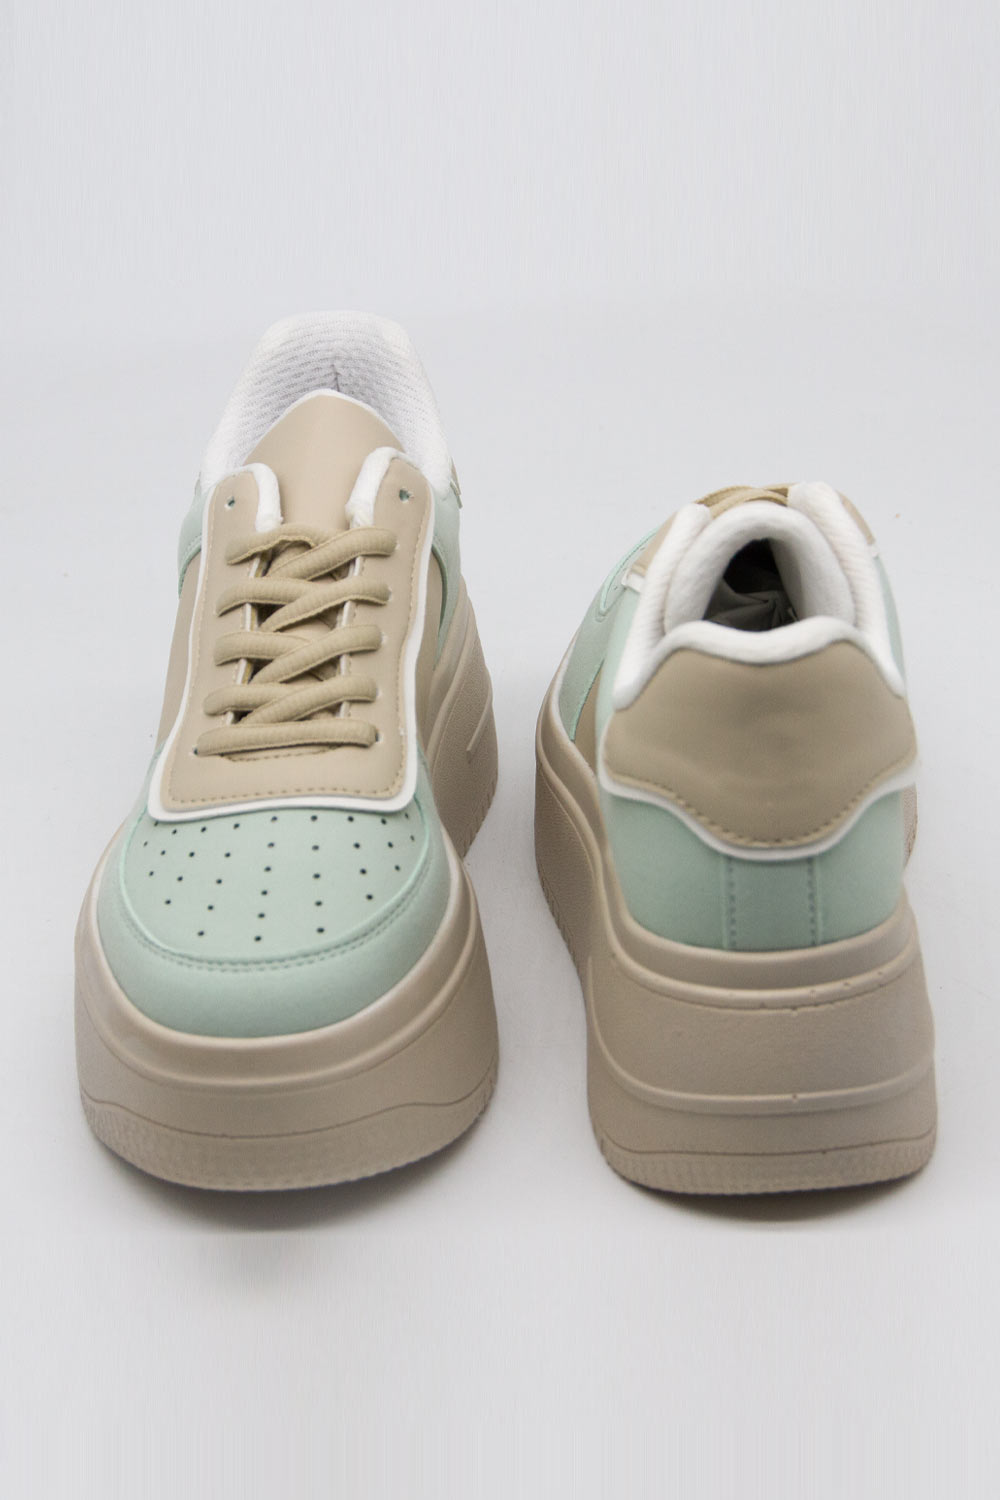 Thick Sole Lace-Up Sport Shoes (Green-Beige)